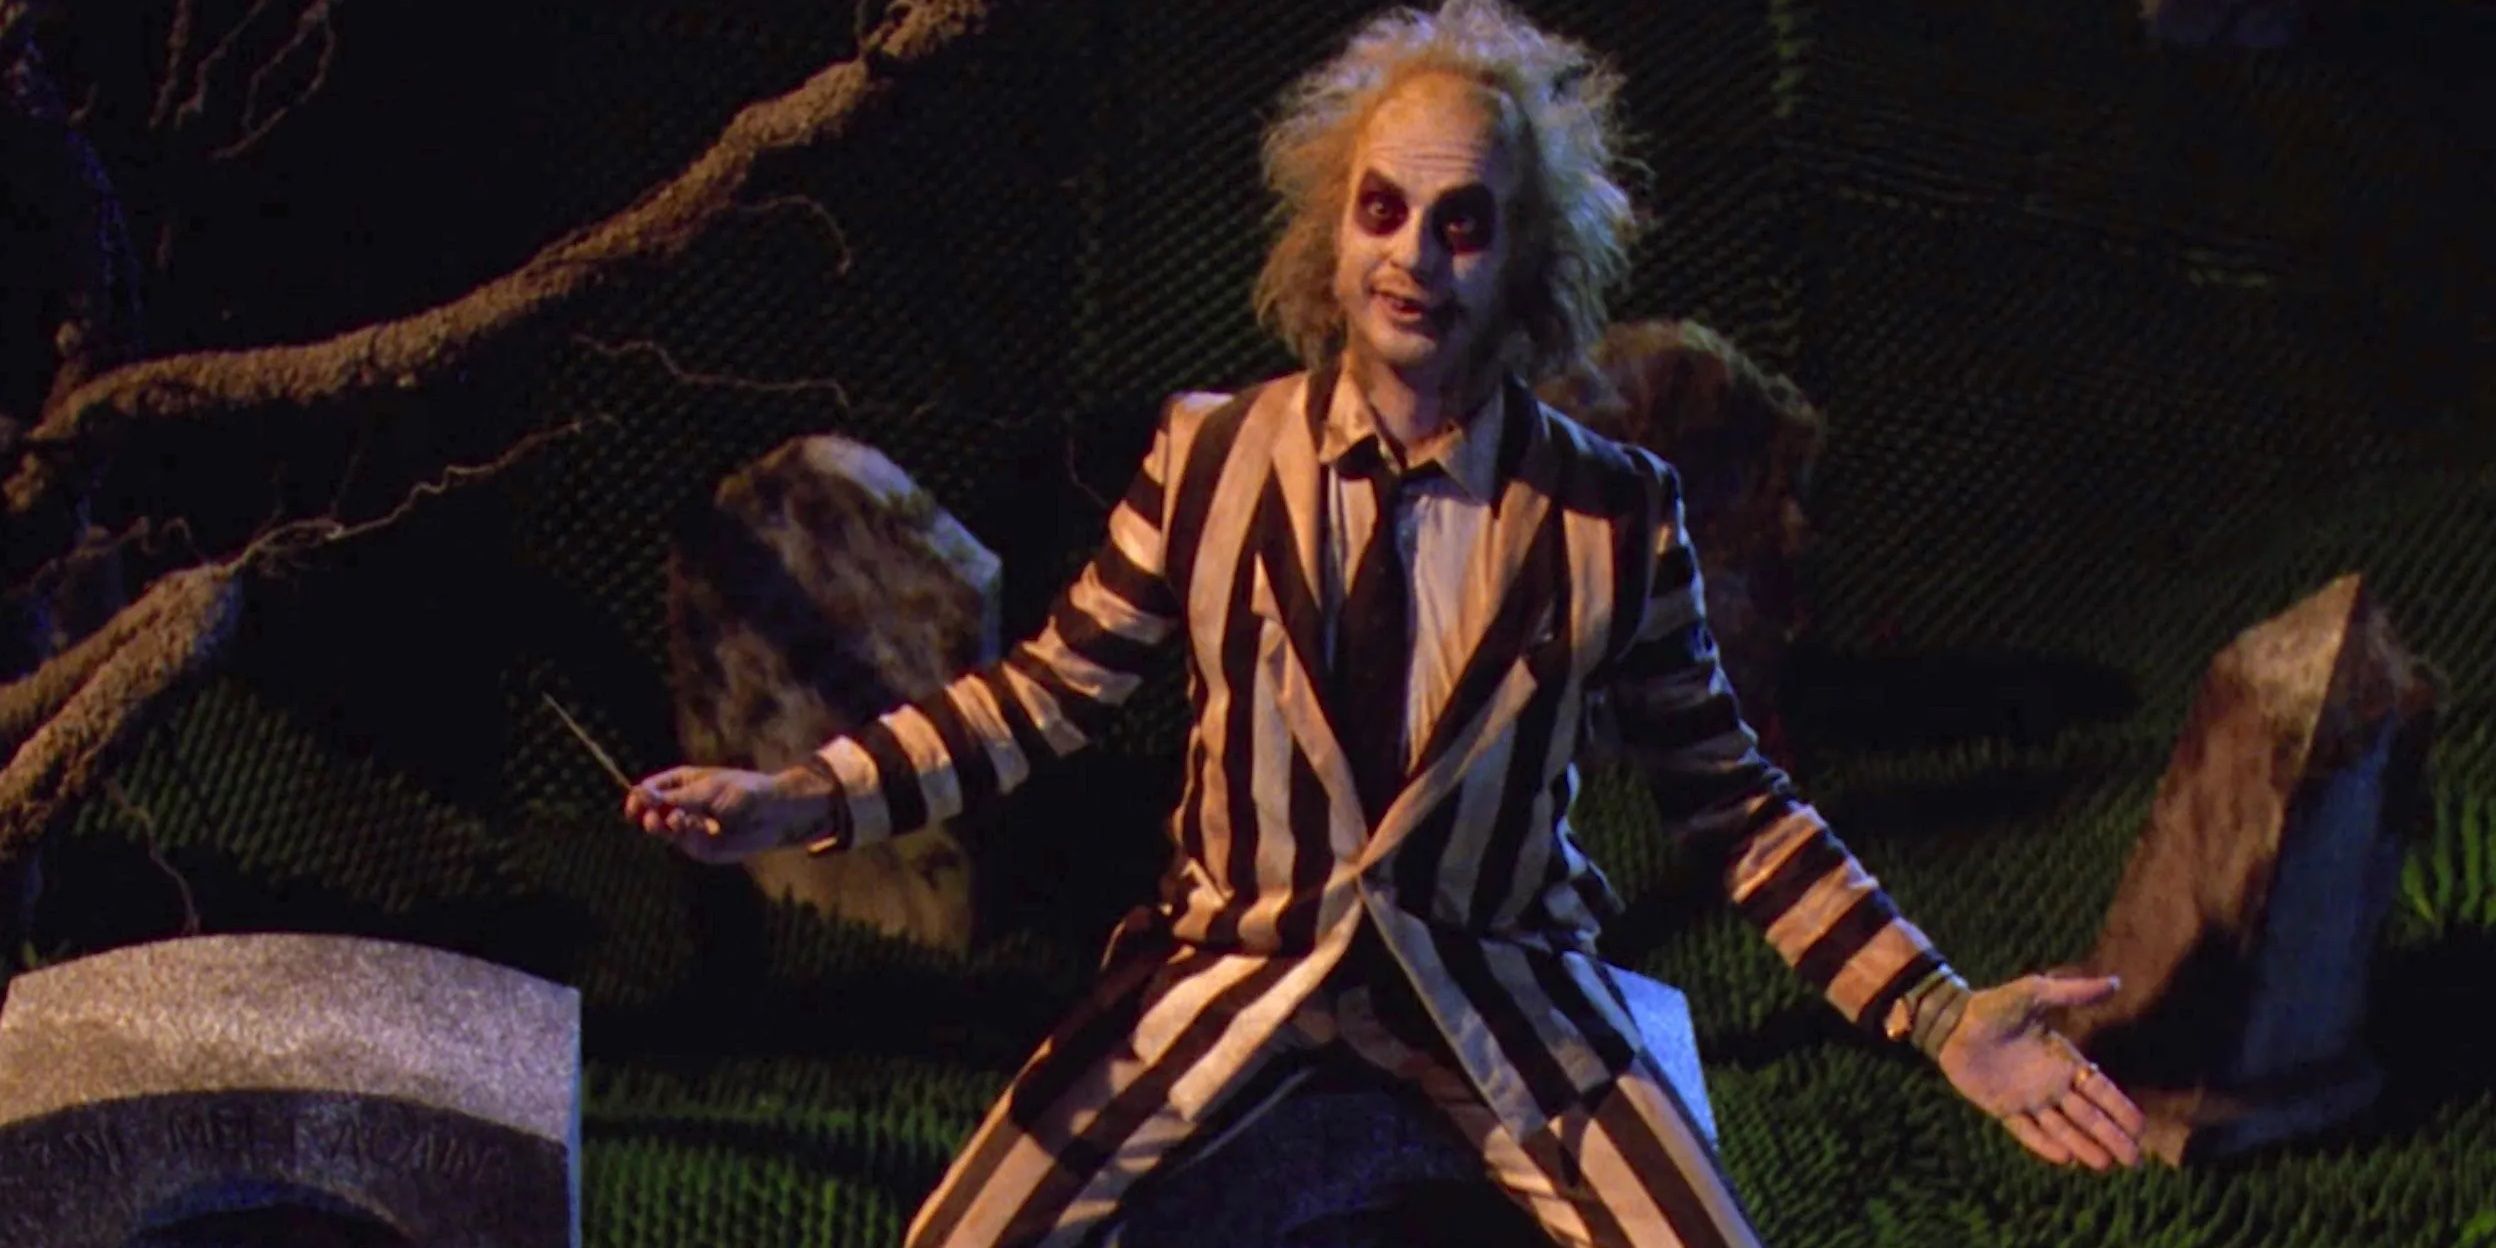 “The World Happens To Disagree With Him”: Surprising Michael Keaton Reveal Erases Beetlejuice 2 Return Fears